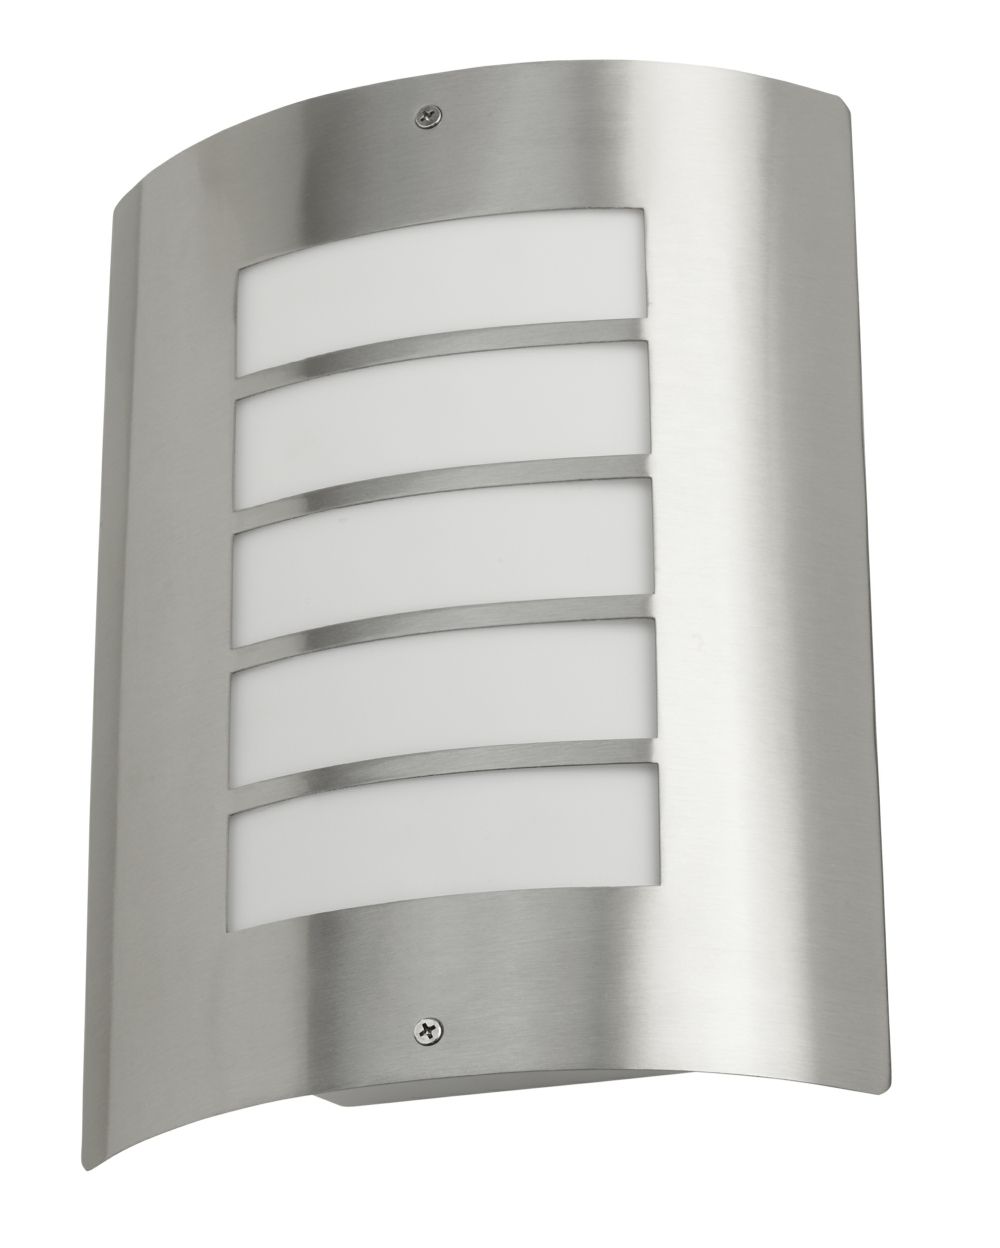 Curved Outdoor Wall Mounted Lighting Pertaining To Outdoor Wall Mount Lighting (View 9 of 15)